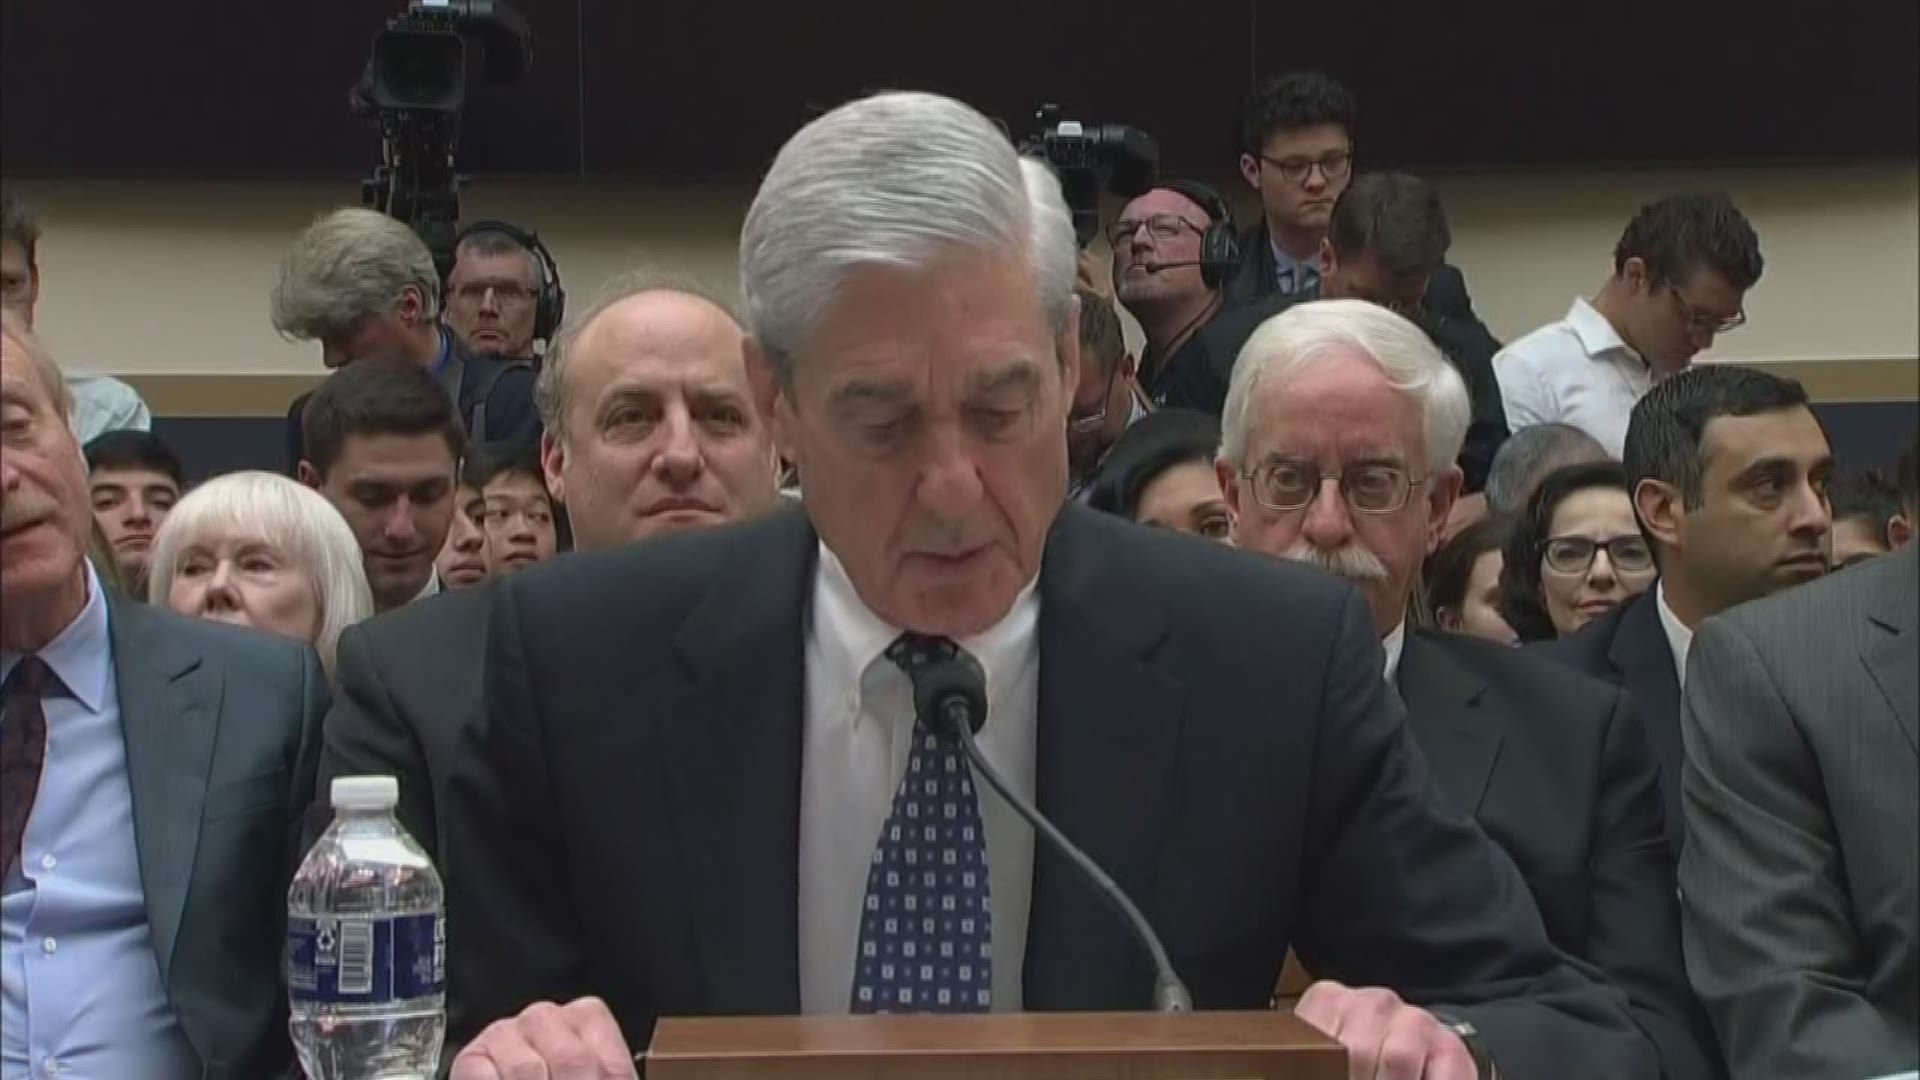 'It is unusual for a prosecutor to testify about a criminal investigation. And given my role as a prosecutor, there are reasons why my testimony will necessarily be limited,' Mueller said in his opening statement.